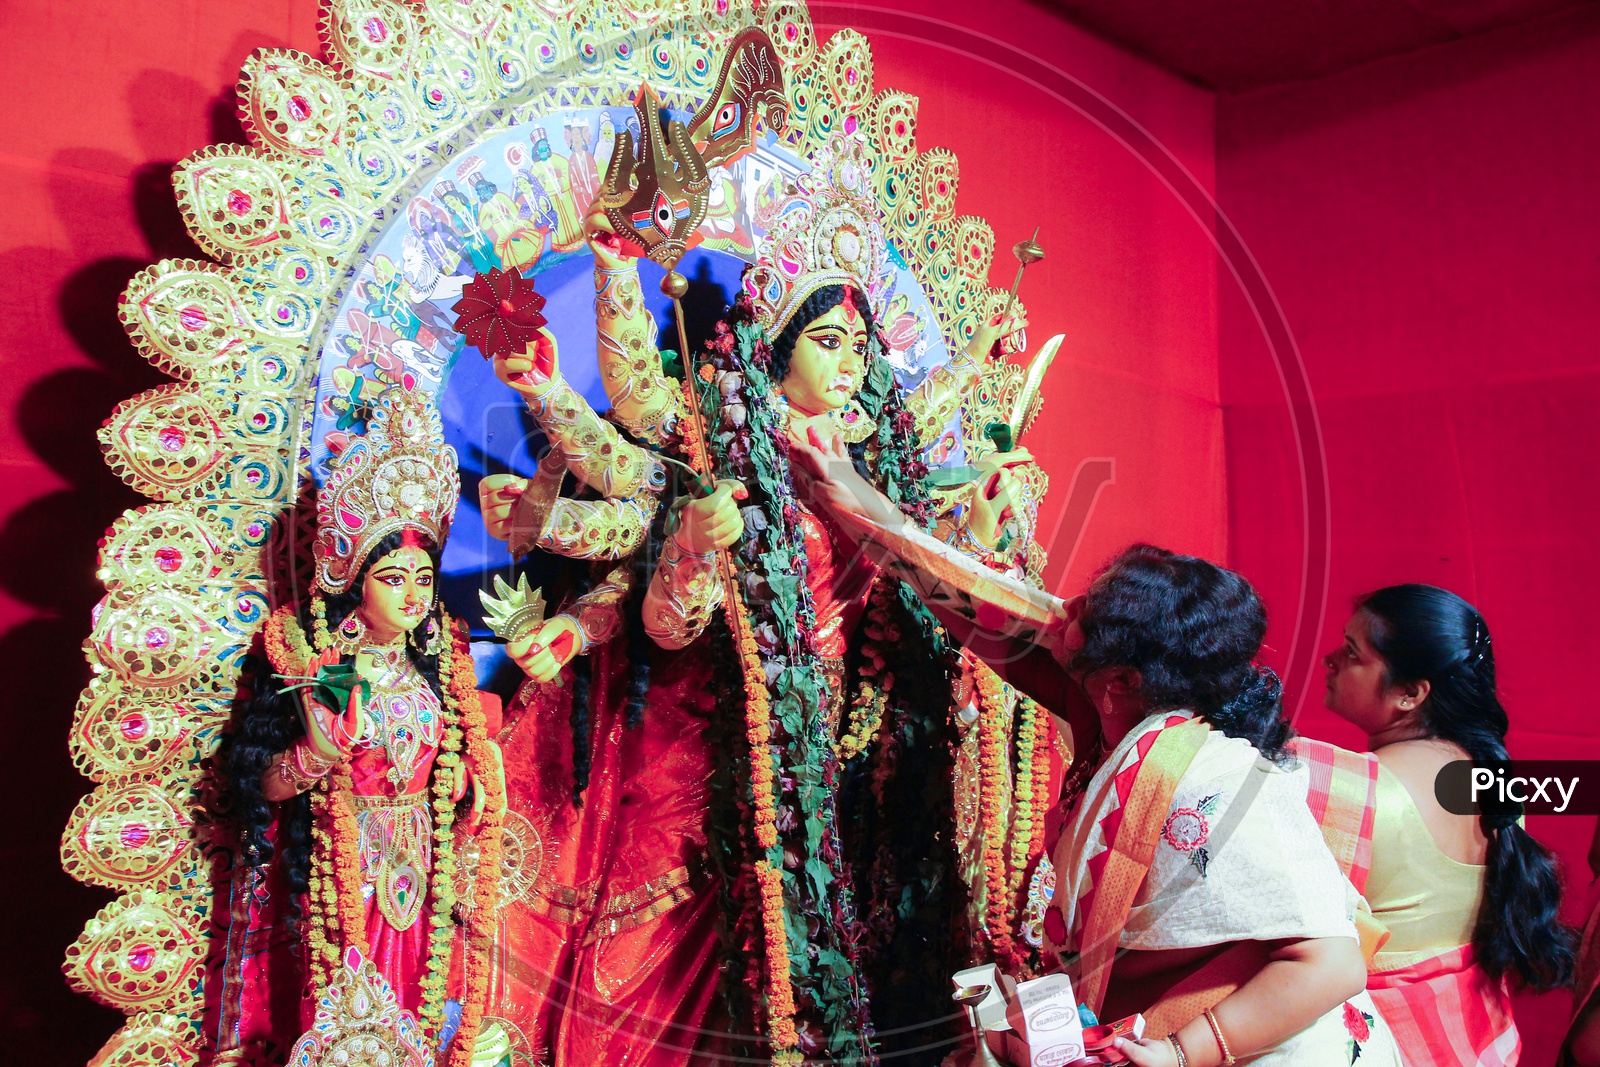 October, 2018, Kolkata, India. Bengali Women Greeting Idol Of Godess Durga With Sweets And Betel Leaves In A Very Important Ritual